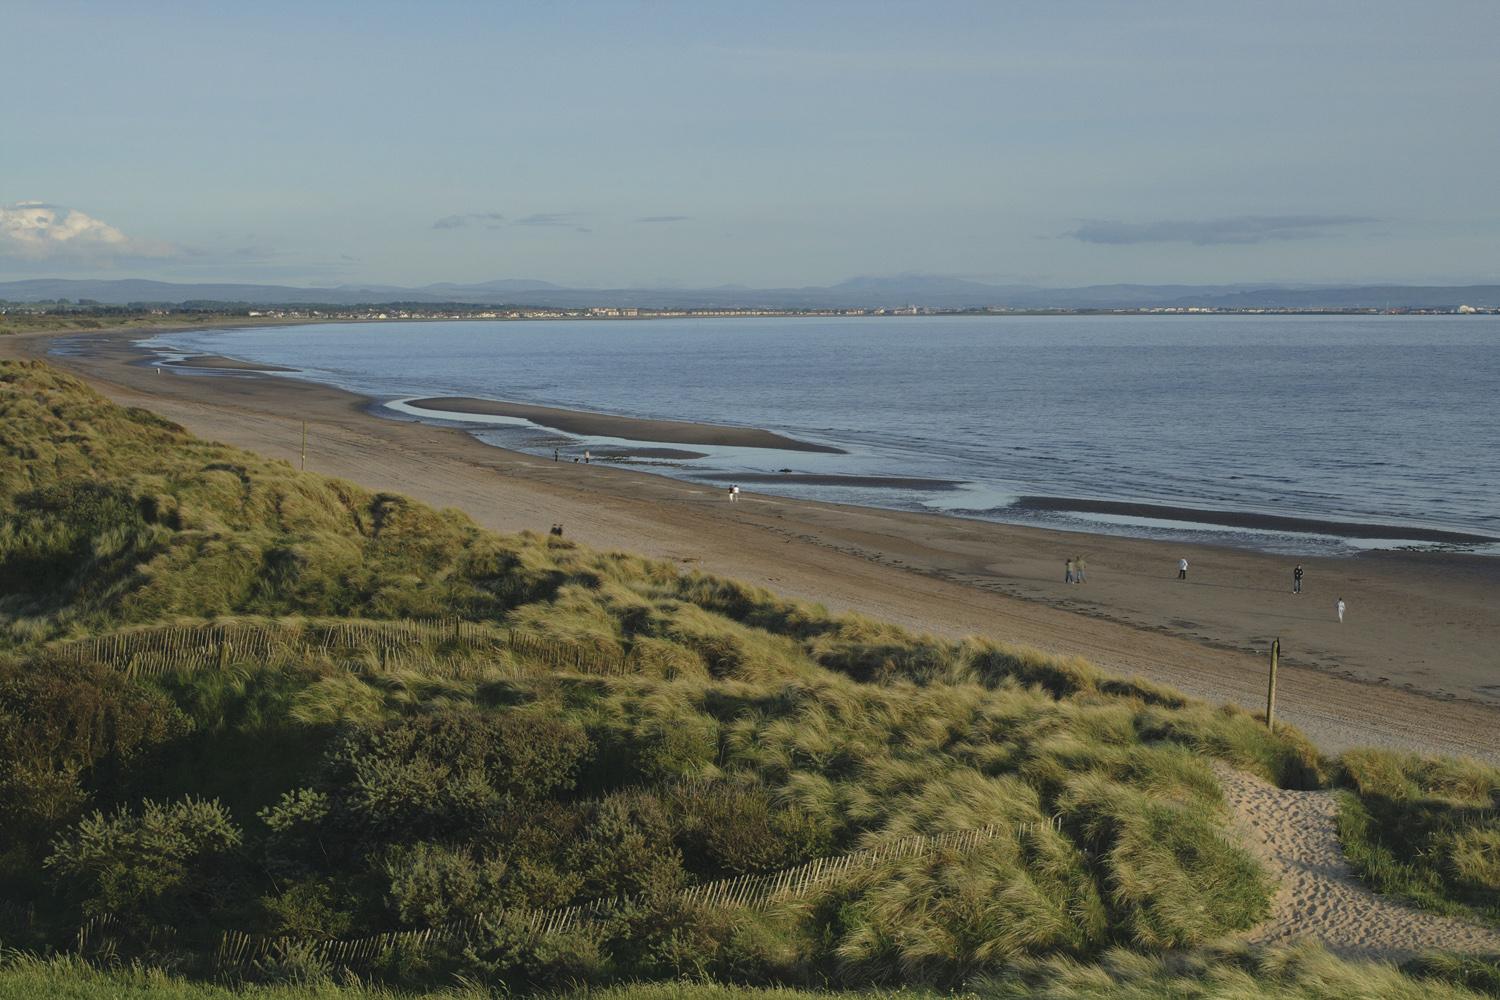 The seaside at Troon, image: Alamy